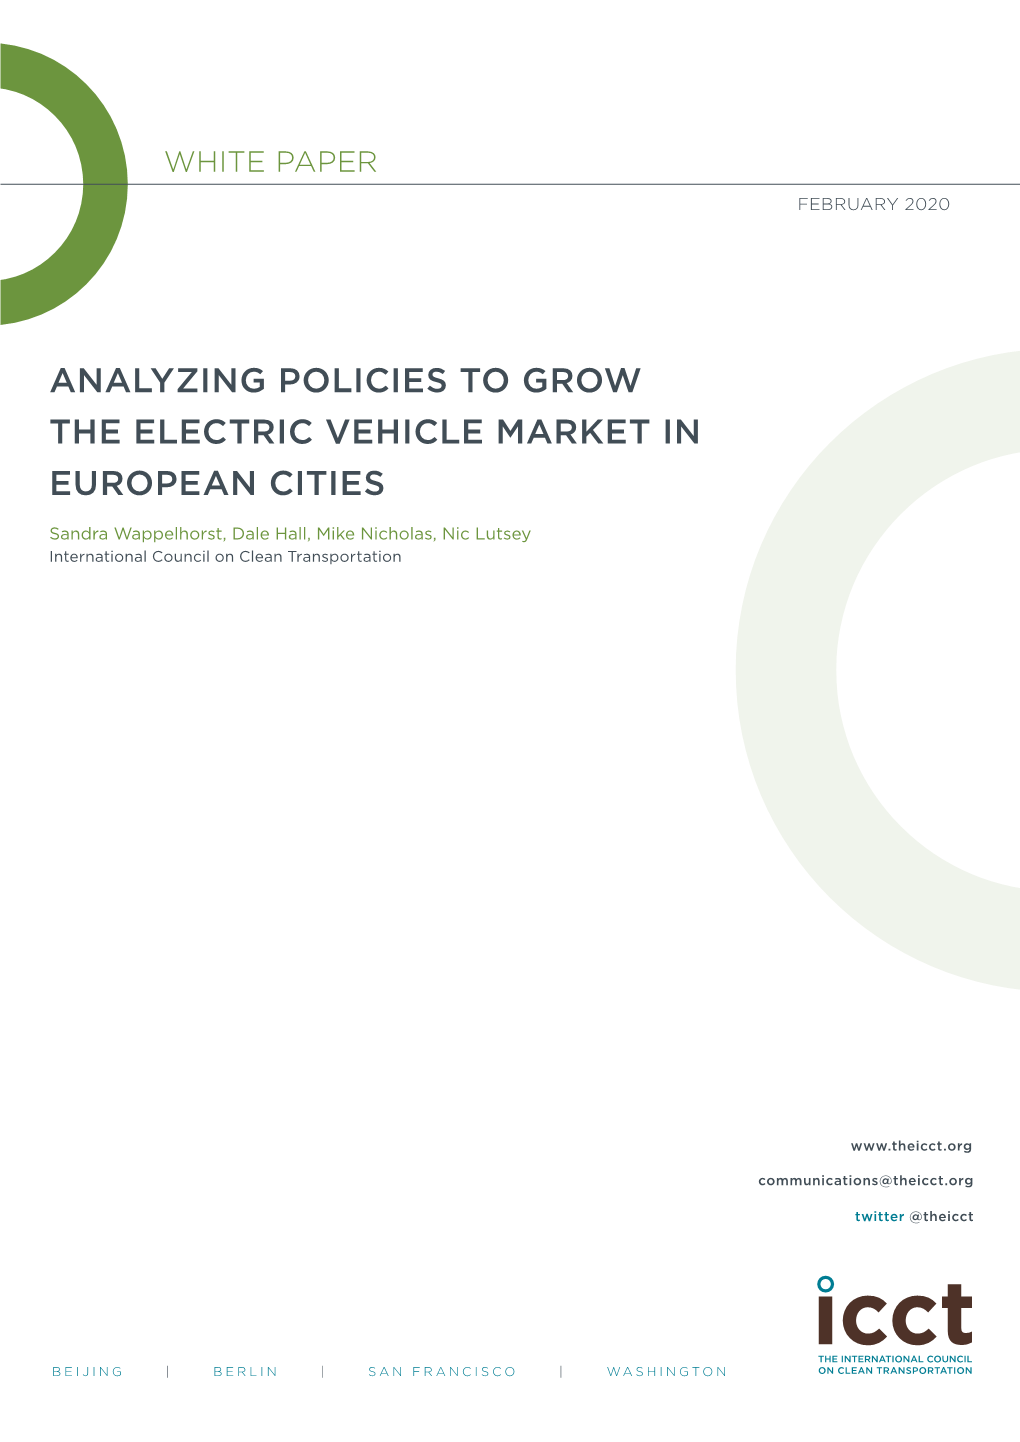 Analyzing Policies to Grow the Electric Vehicle Market in European Cities